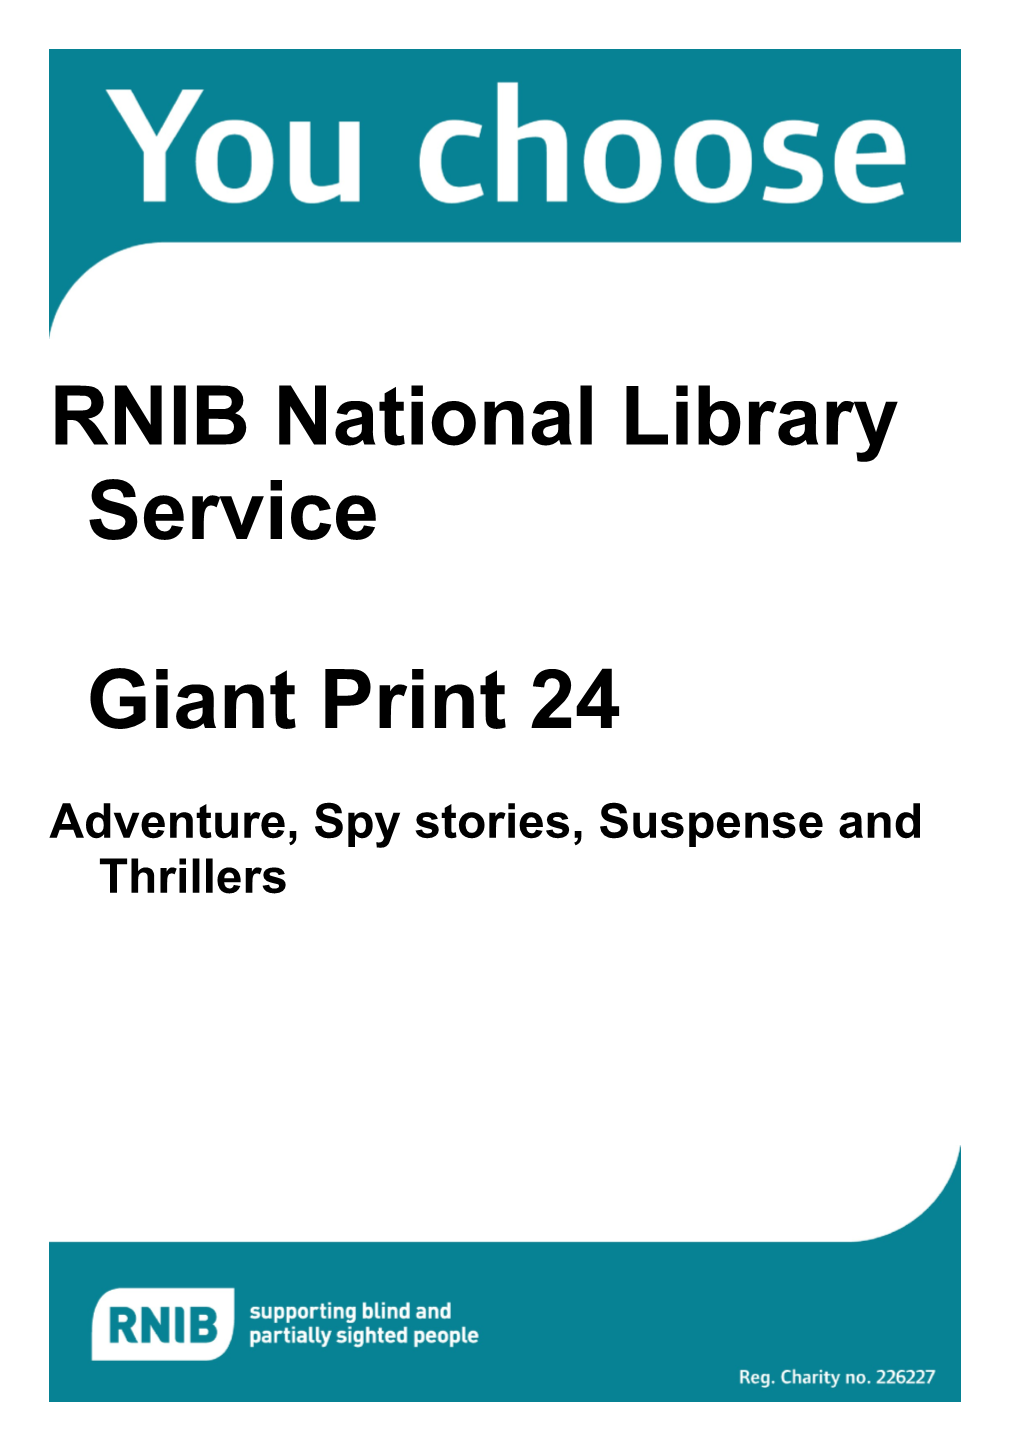 Adventure, Spy and Thriller Fiction Book List for Giant Print (Word)